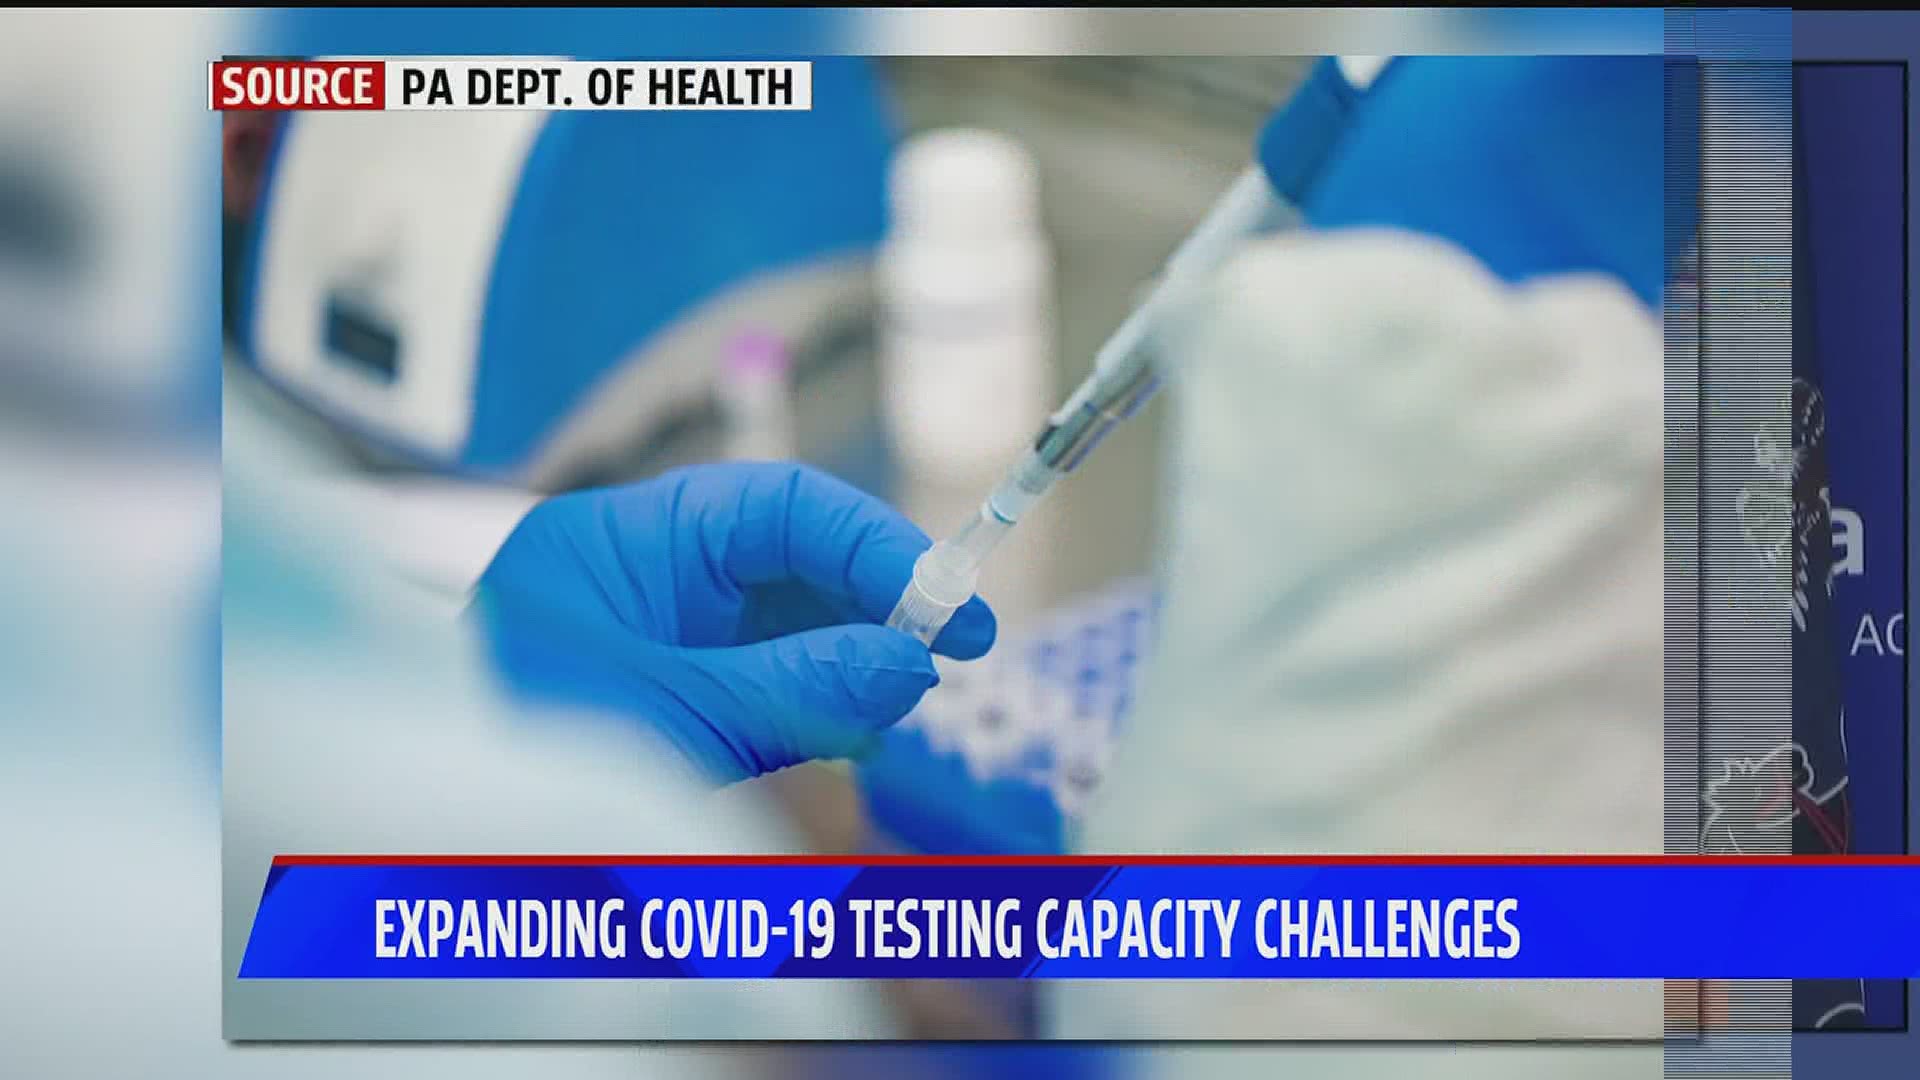 Expanding COVID-19 Testing Capacity Challenges as per guidelines today from Gov. Wolf